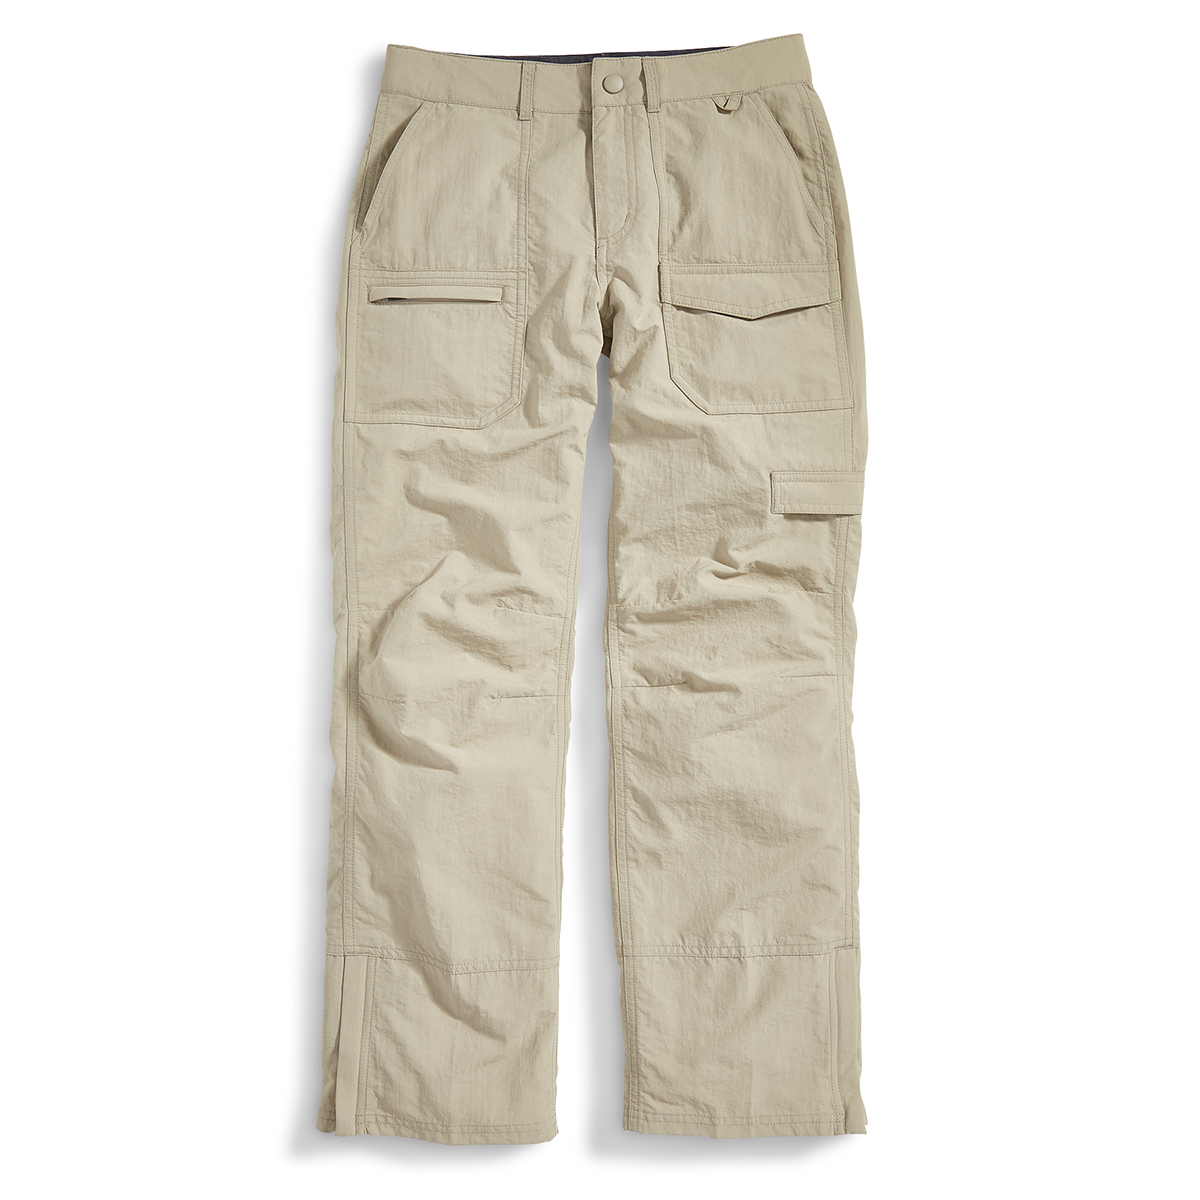 Ems Girl's Camp Cargo Pants - Brown, XS